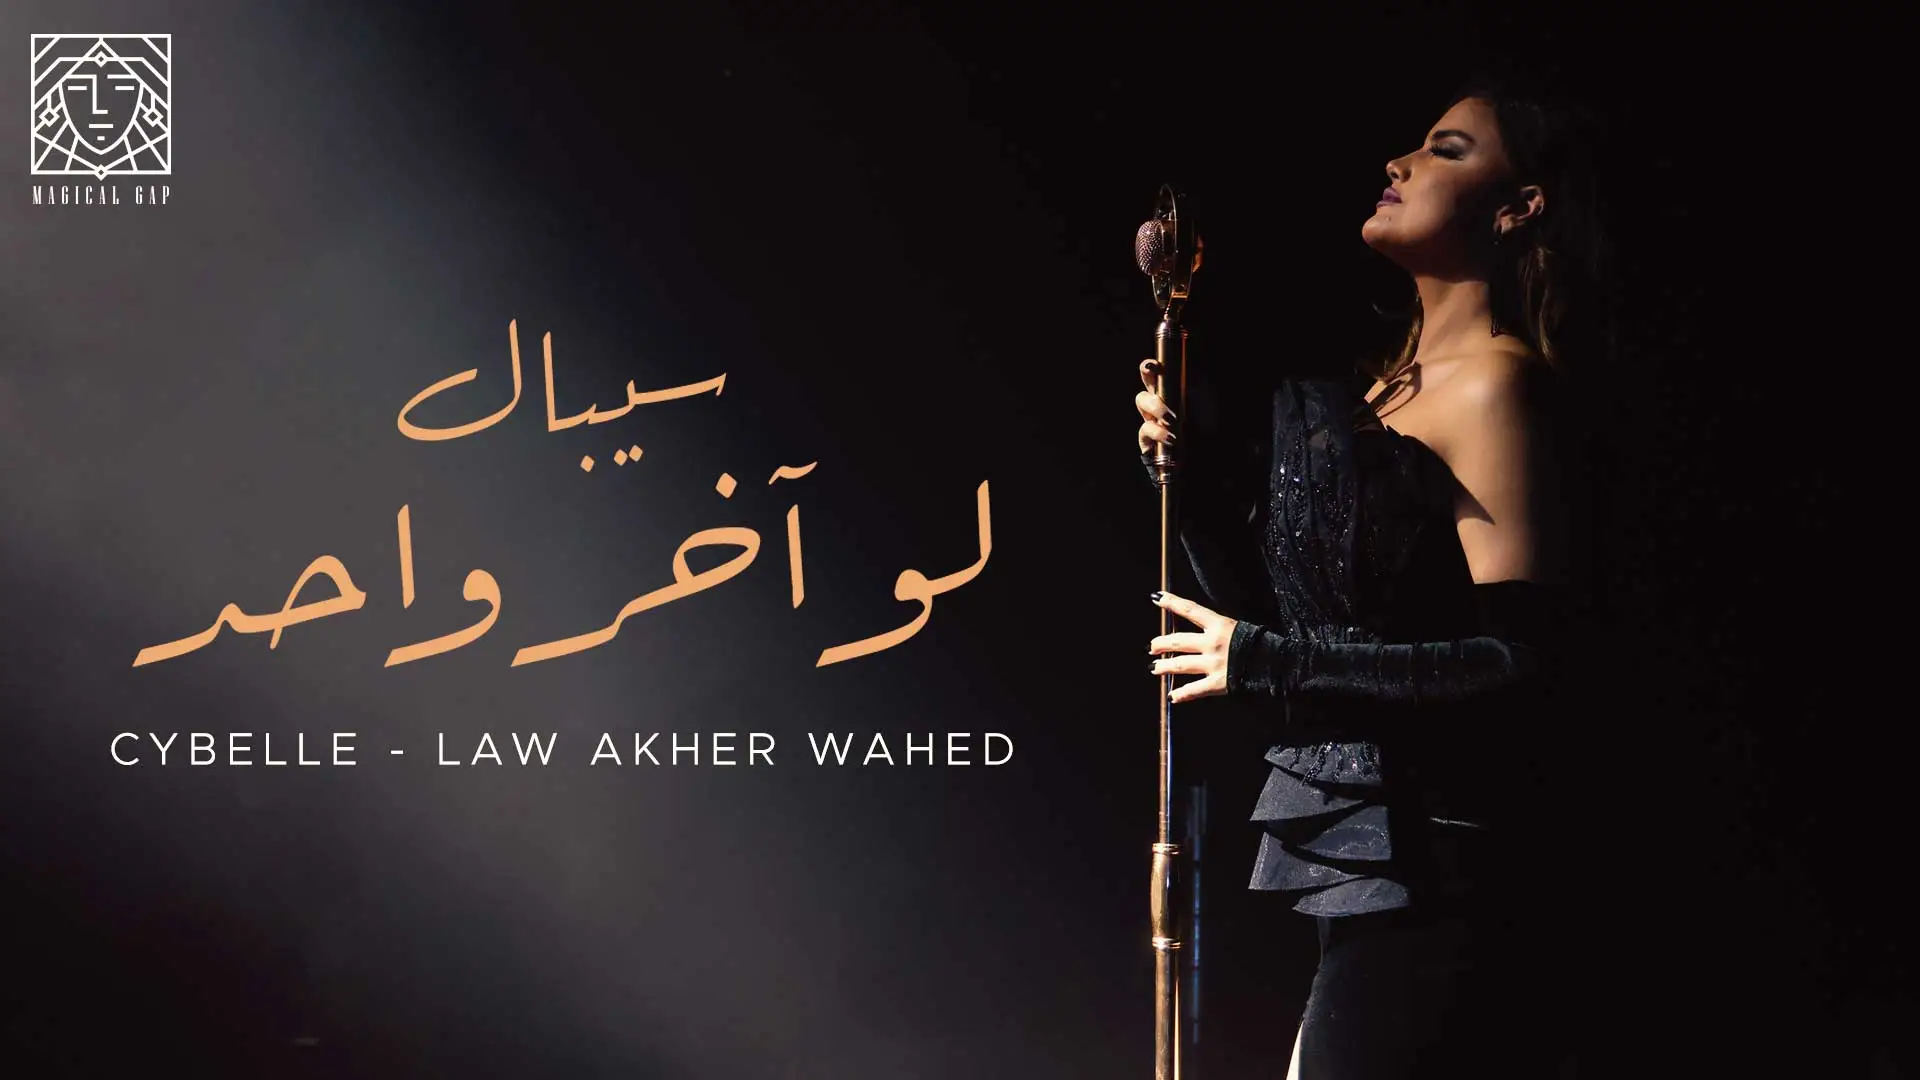 Cybelle - Law Akher Wahed